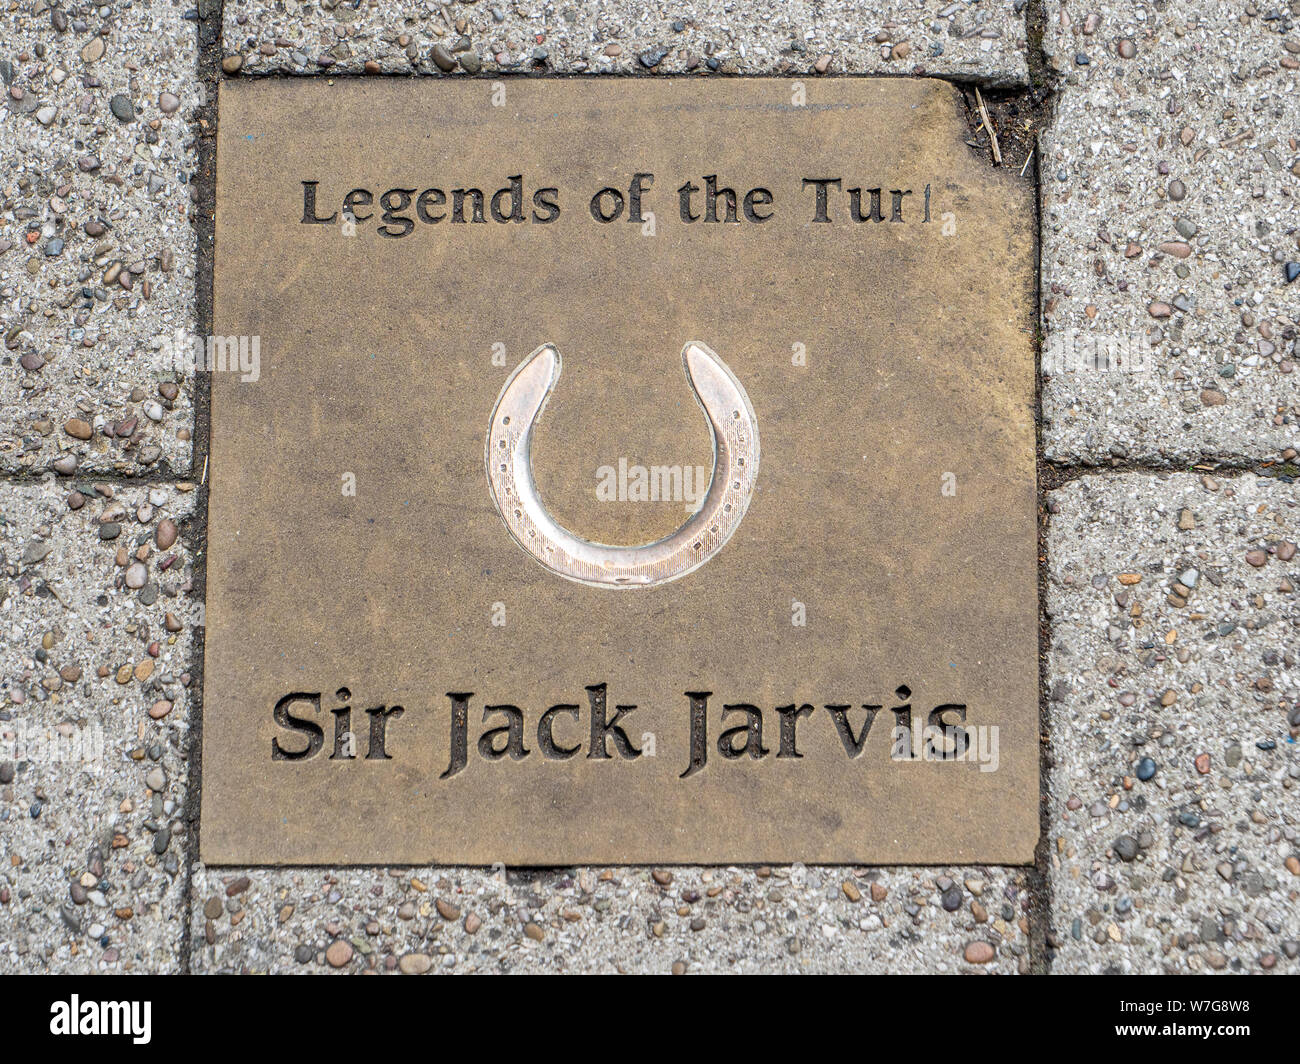 Legends of the Turf Newmarket - Newmarket's 'Walk of Fame' - commemorative paving slabs being laid in Newmarket High Street. Sir Jack Jarvis, Trainer. Stock Photo